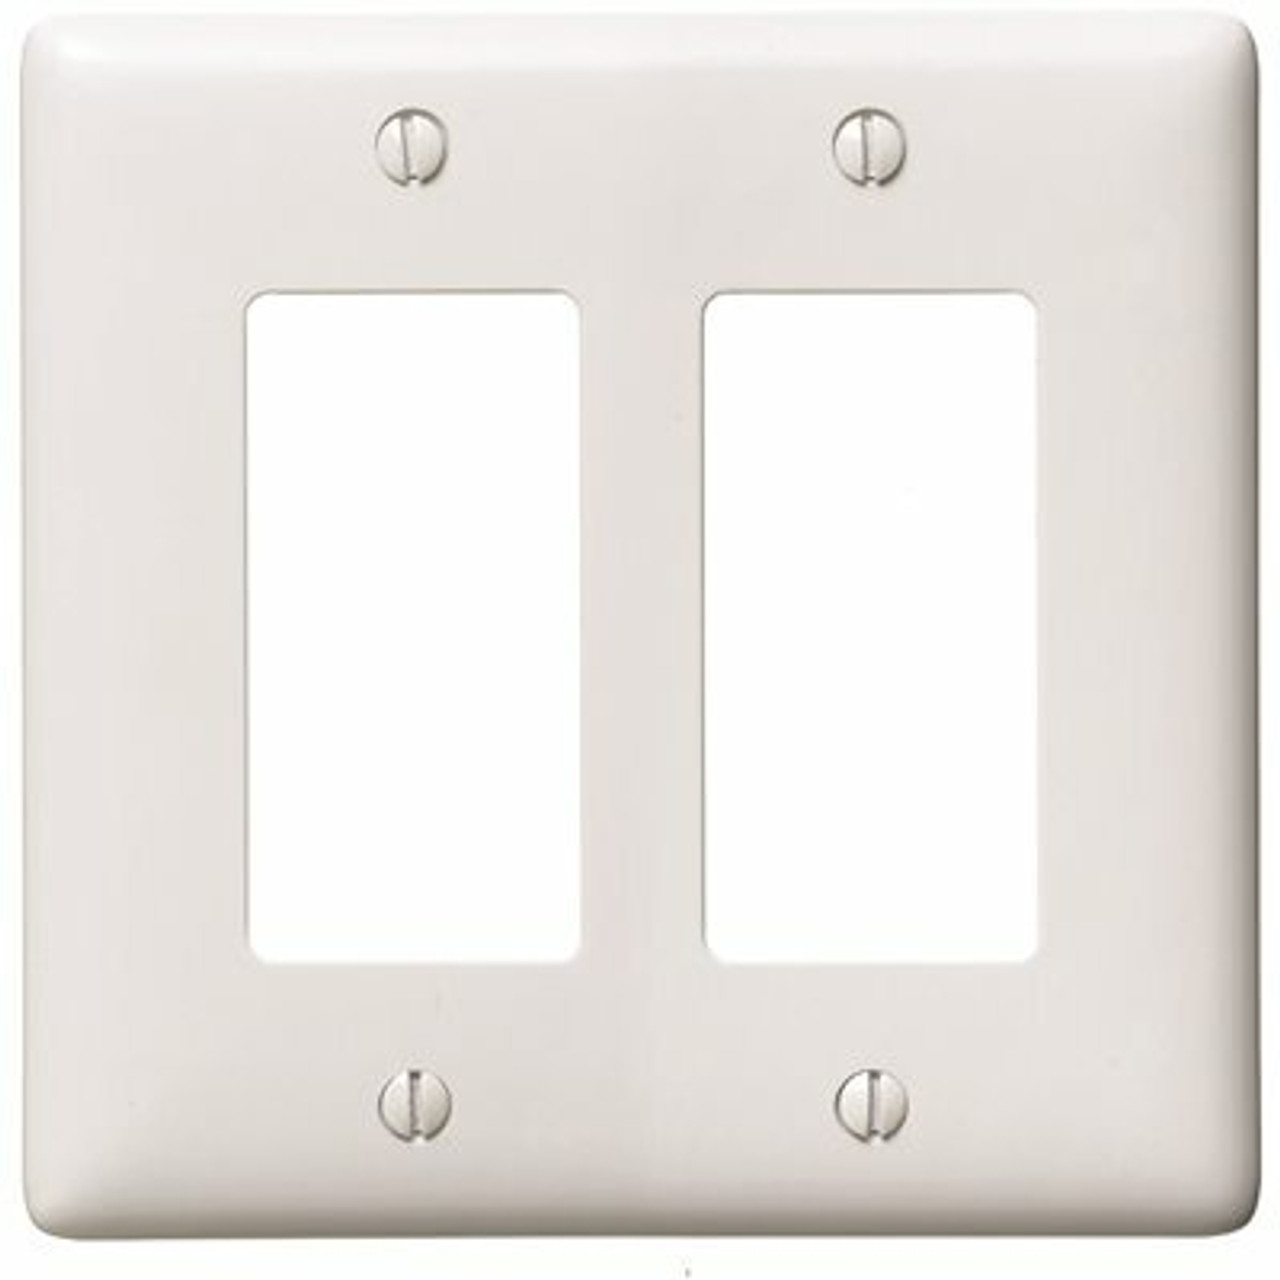 Hubbell Wiring 2-Gang Medium Size Decorator Wall Plate - White